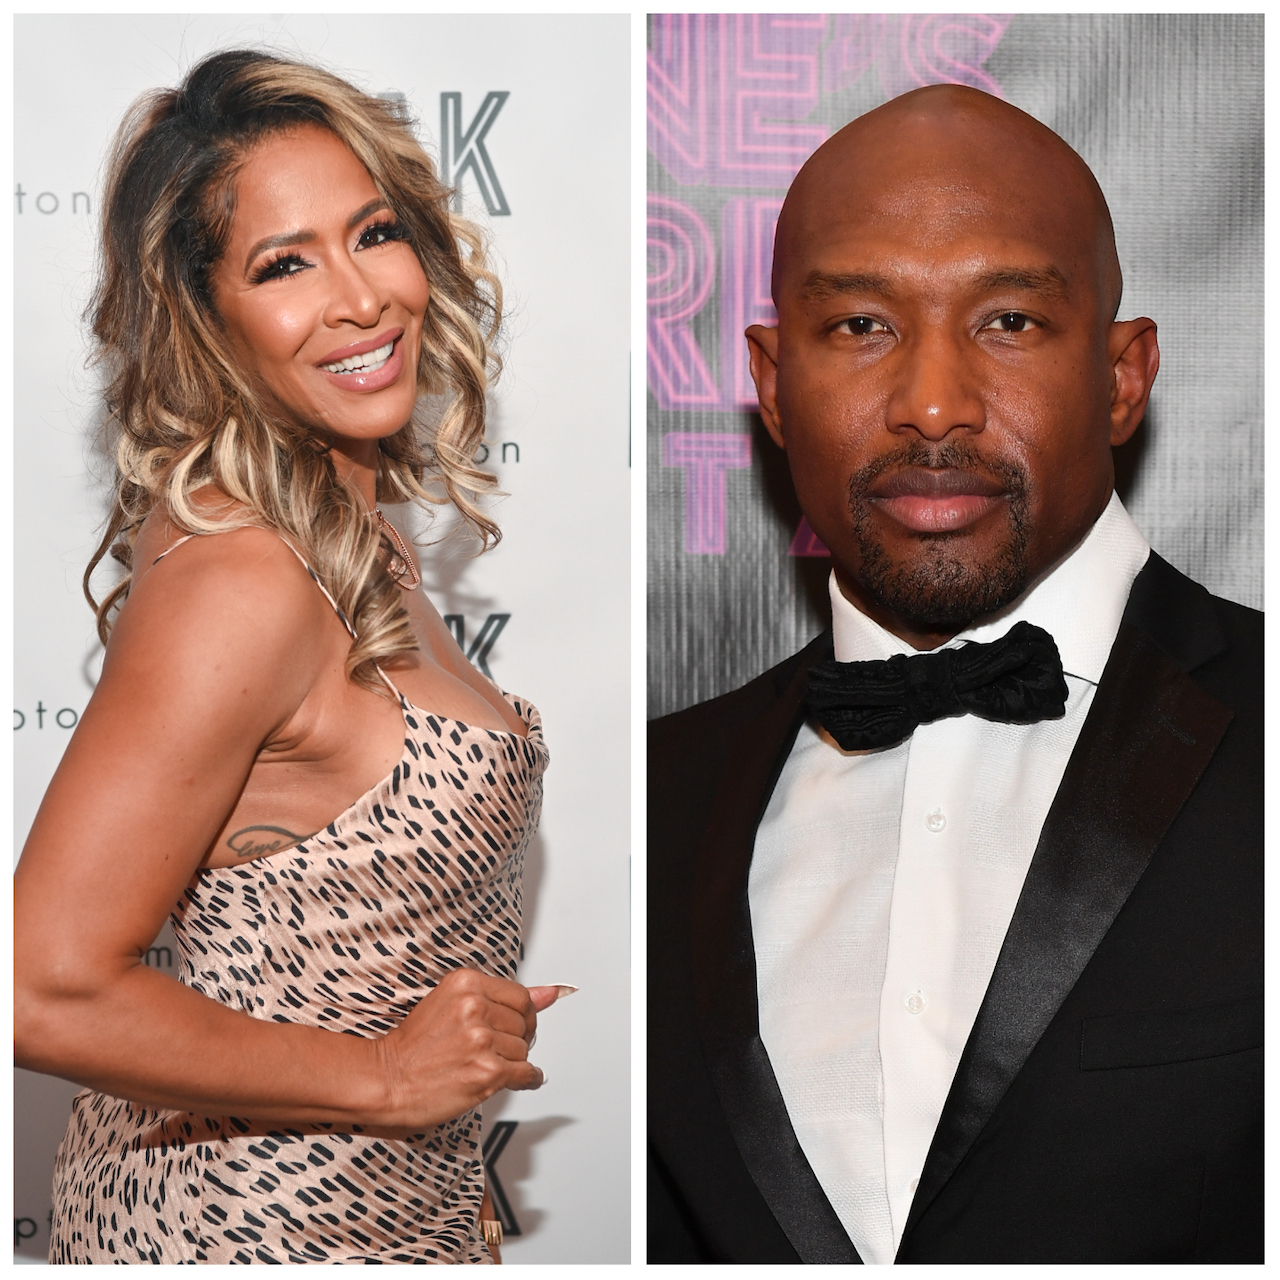 Sheree Whitfield and Martell Holt; Whitfield and Holt met through mutual friends